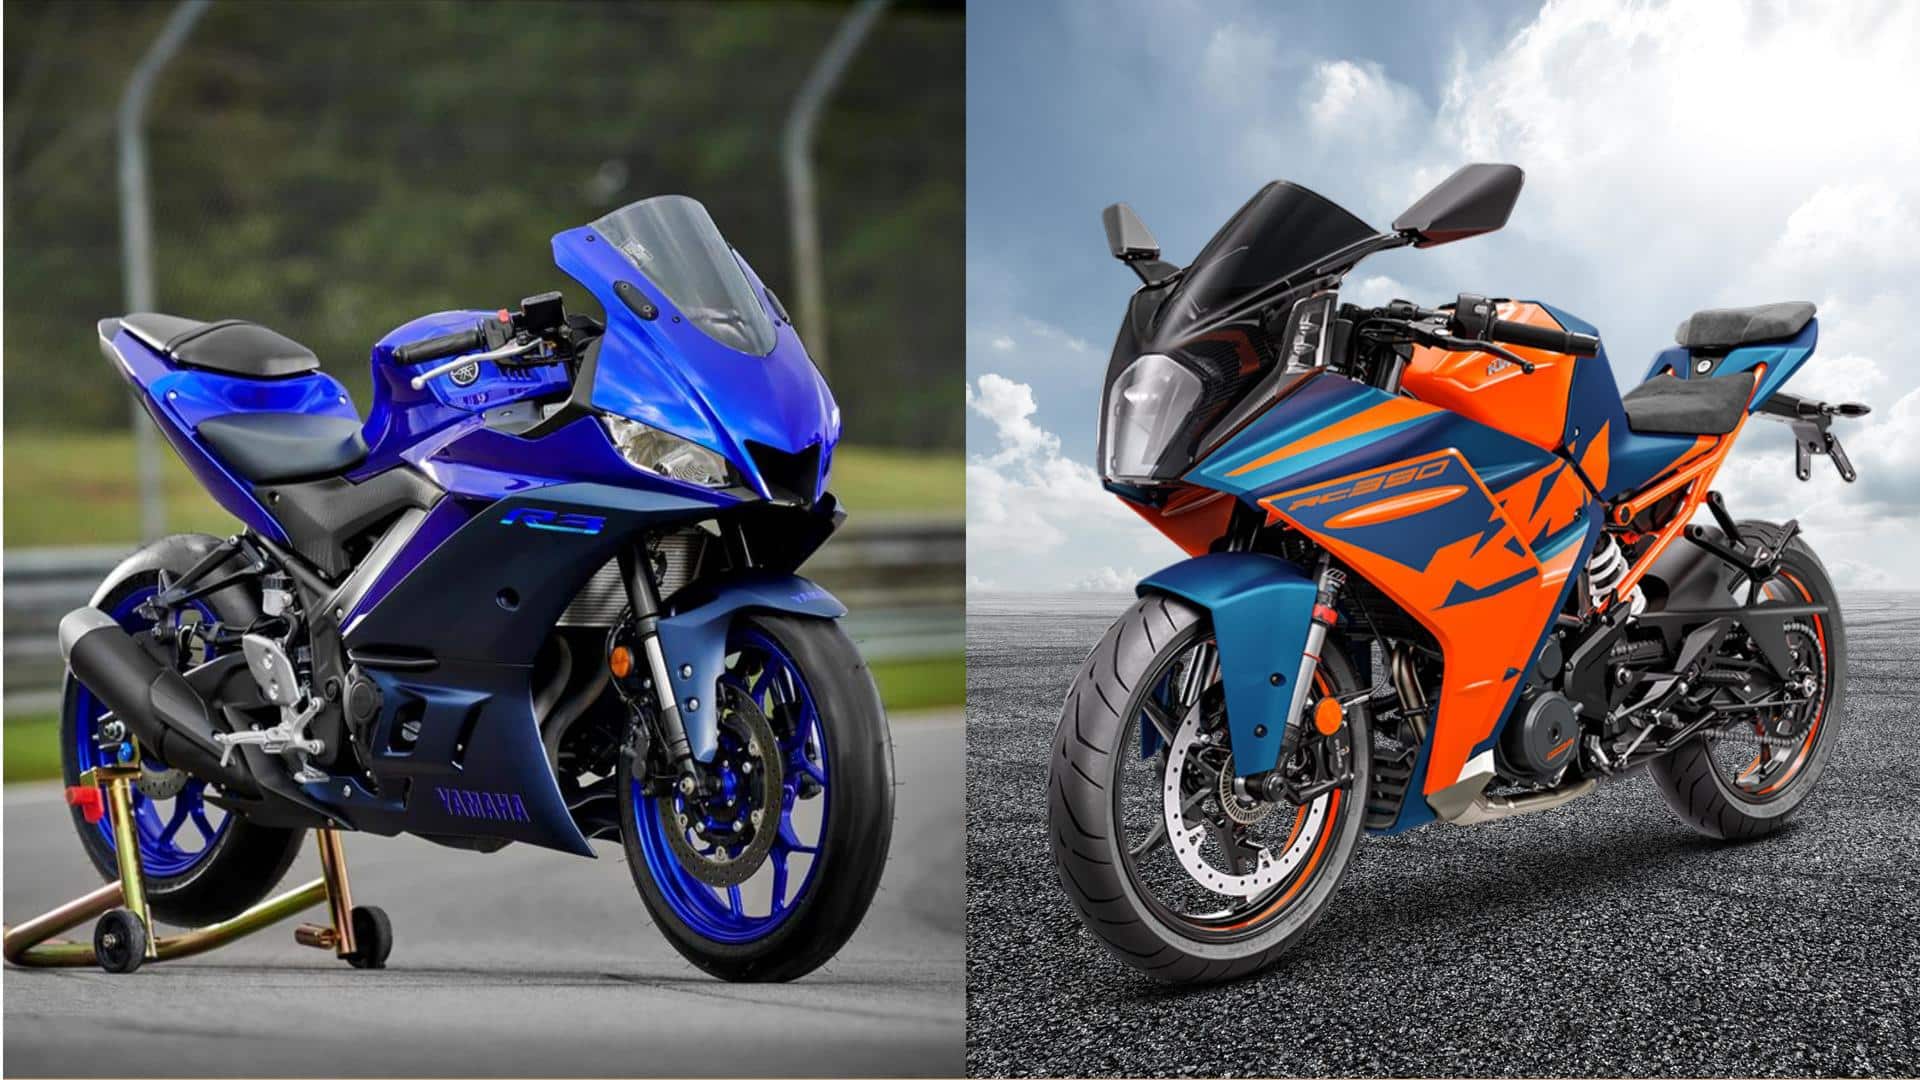 2023 Yamaha YZF-R3 v/s 2023 KTM RC 390: Features compared